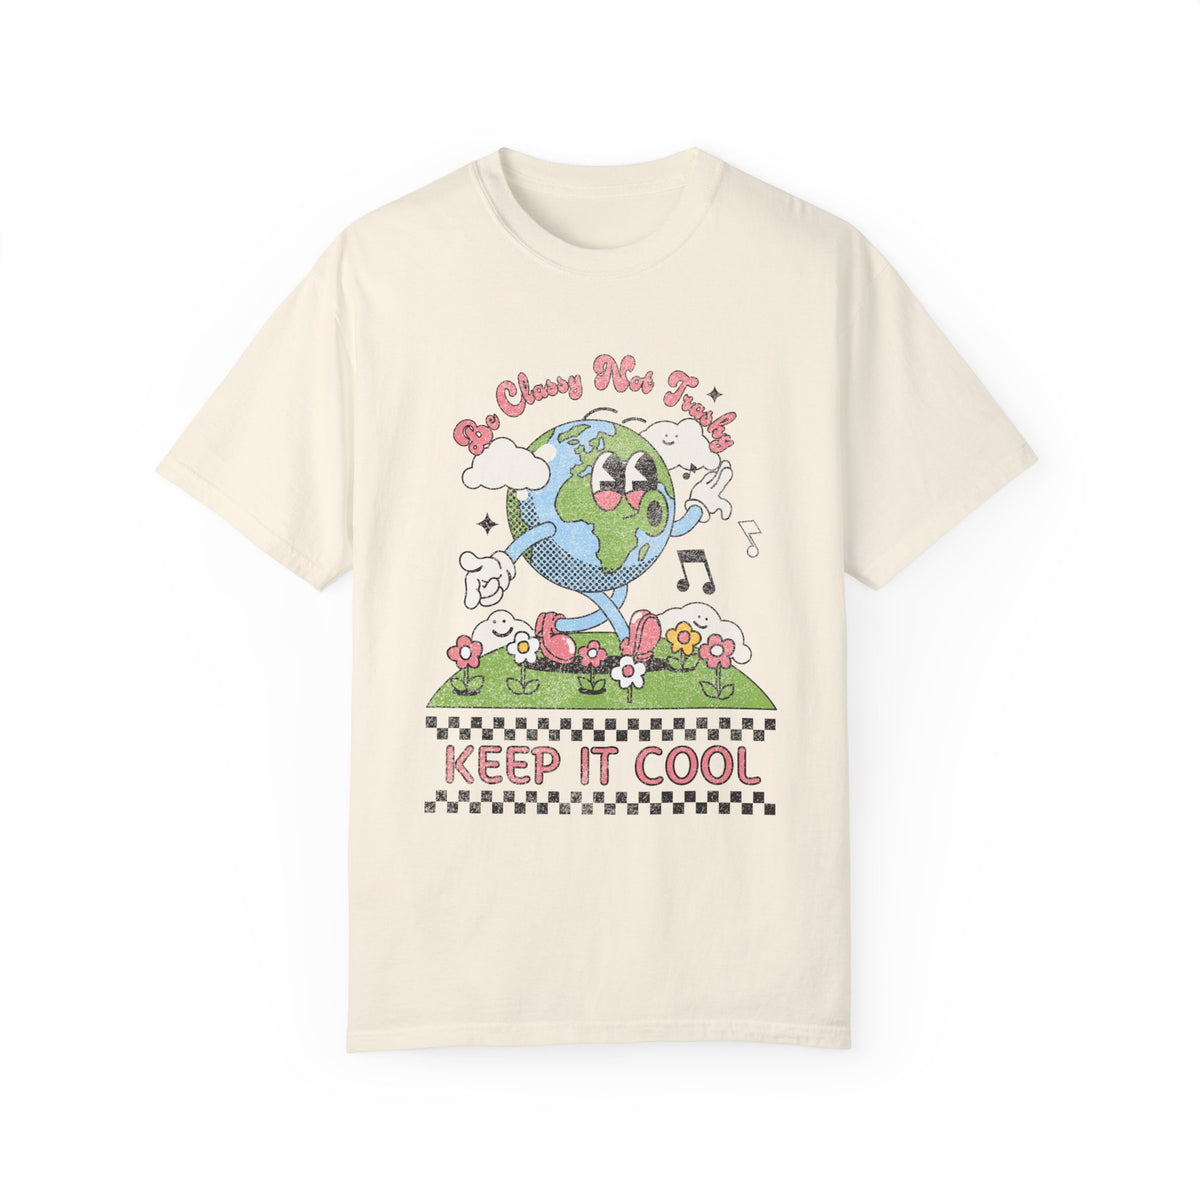 Earth Day Shirt Unisex | Keep it cool T-shirt | Vintage Earth Day Shirt | Be Classy Not Trashy